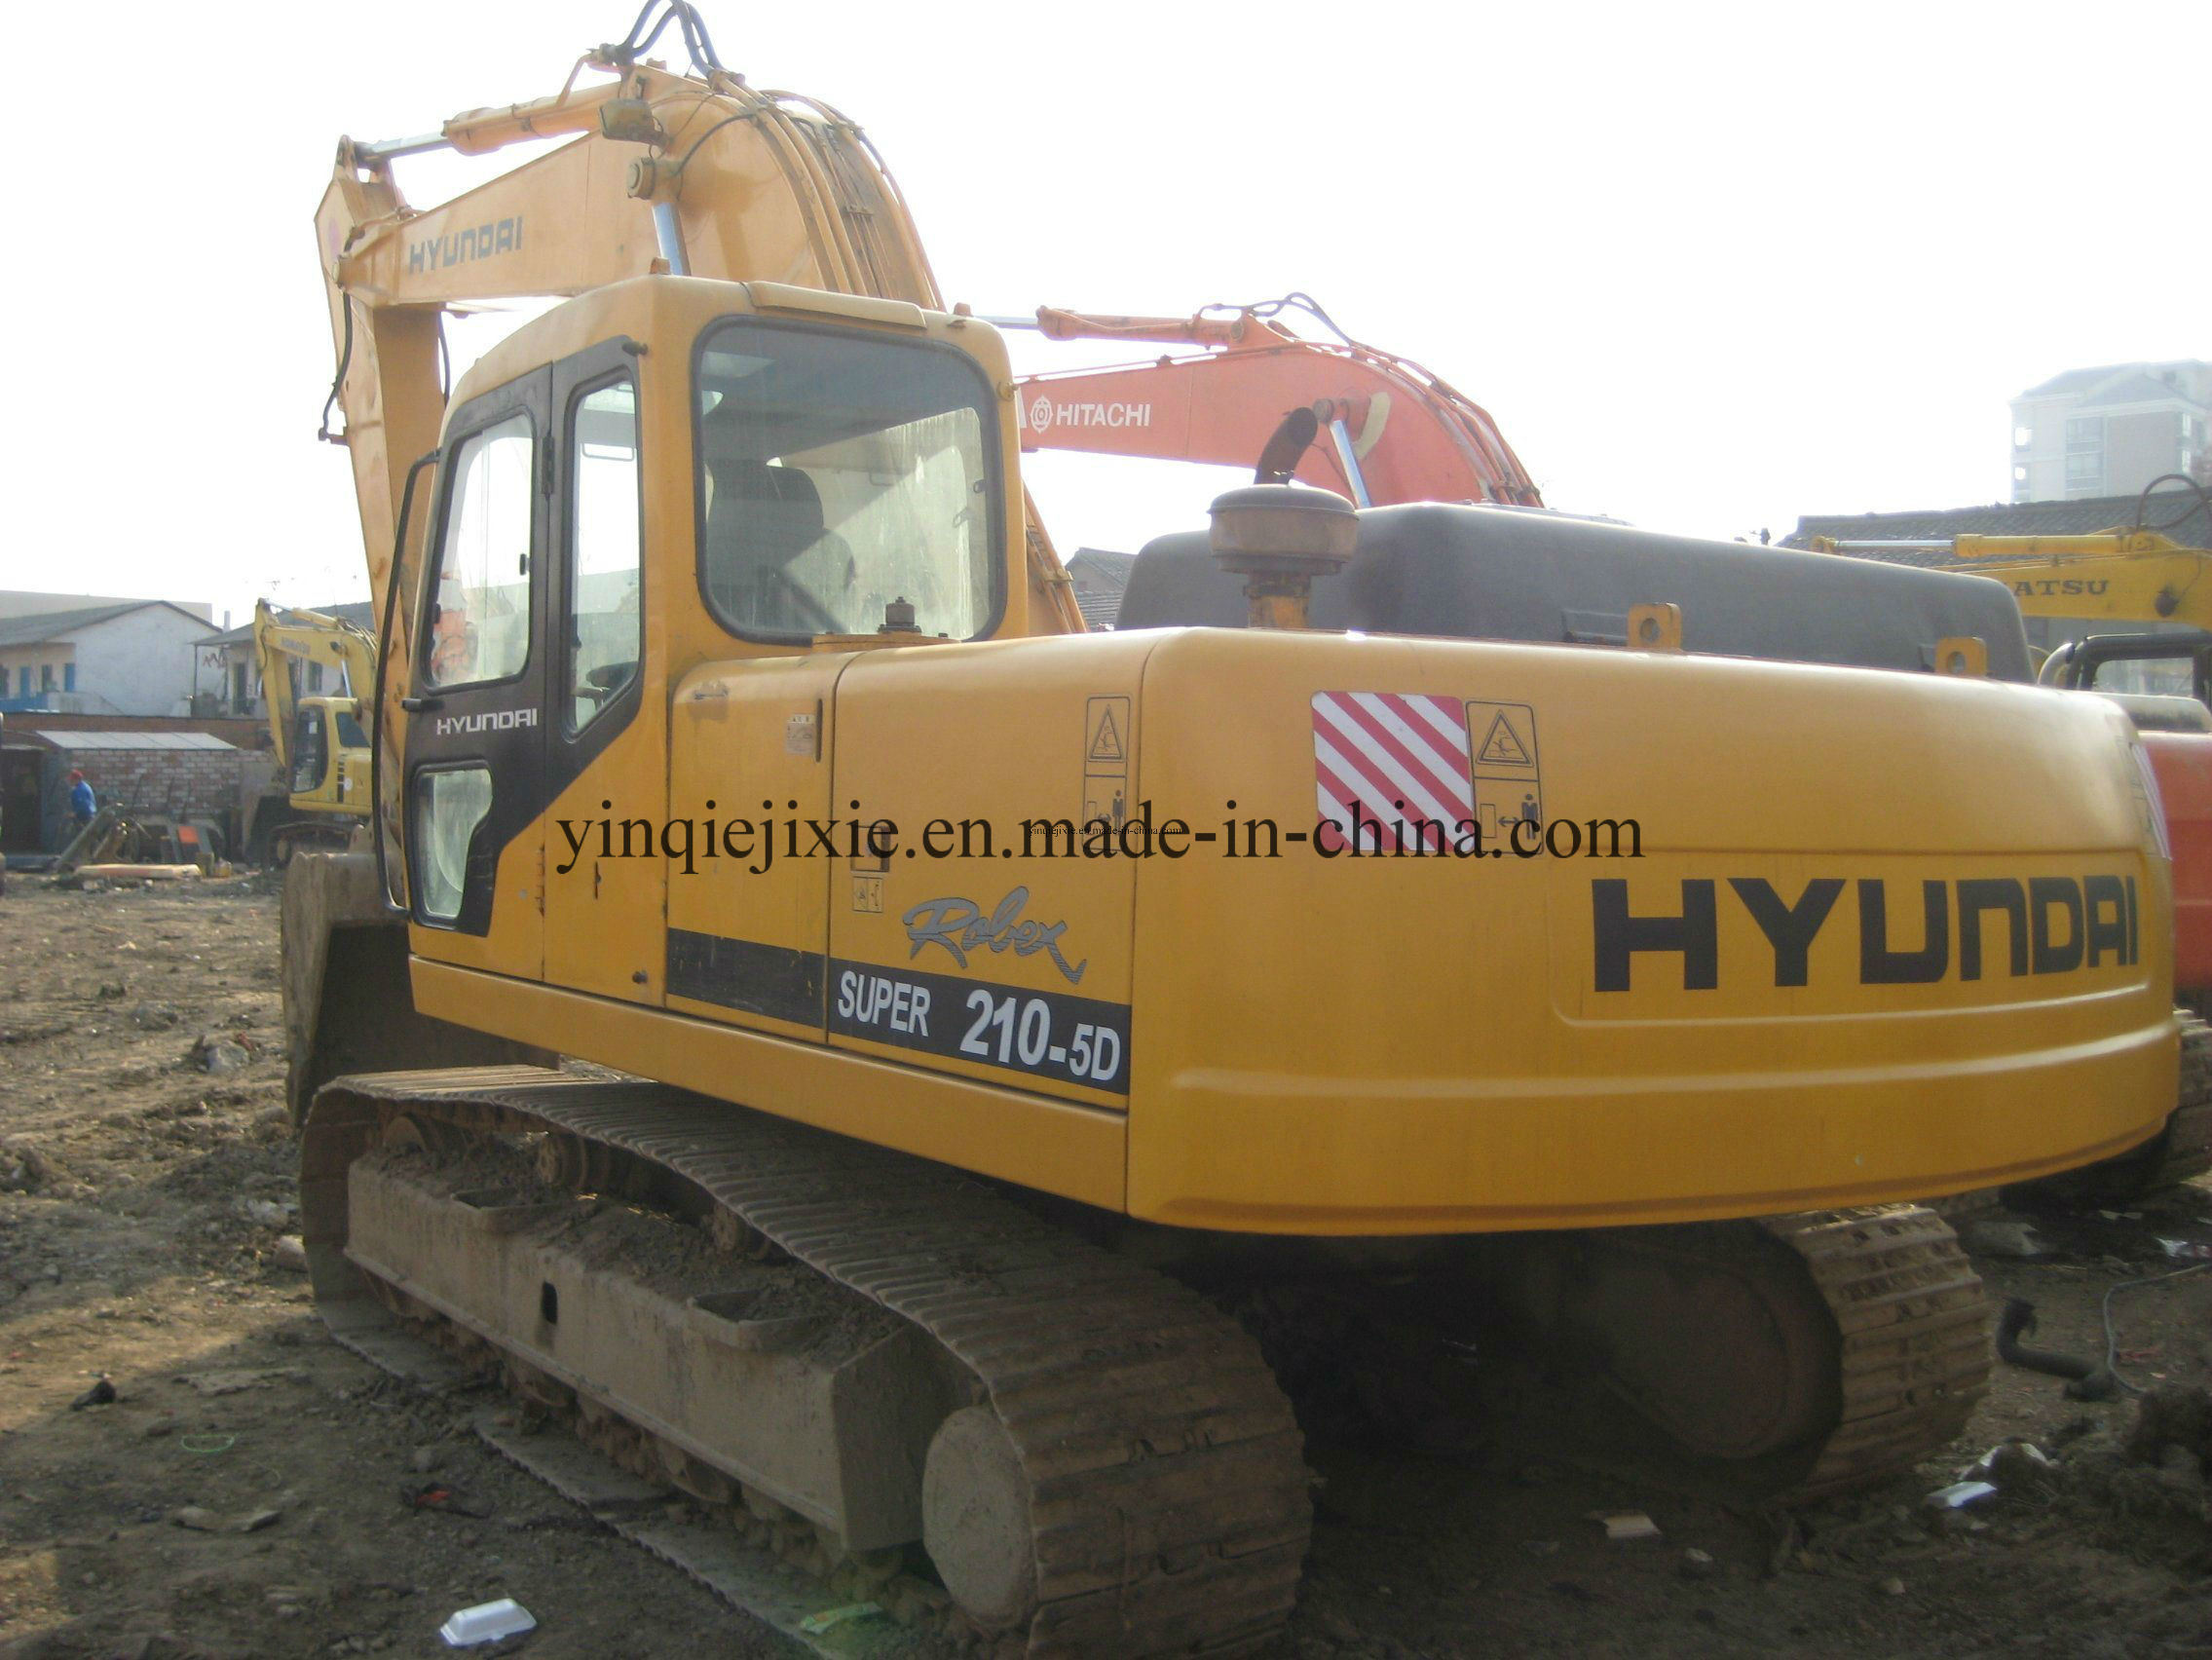 Used Hyundai 210-5D Excavator with Good Condition in Hot Sale